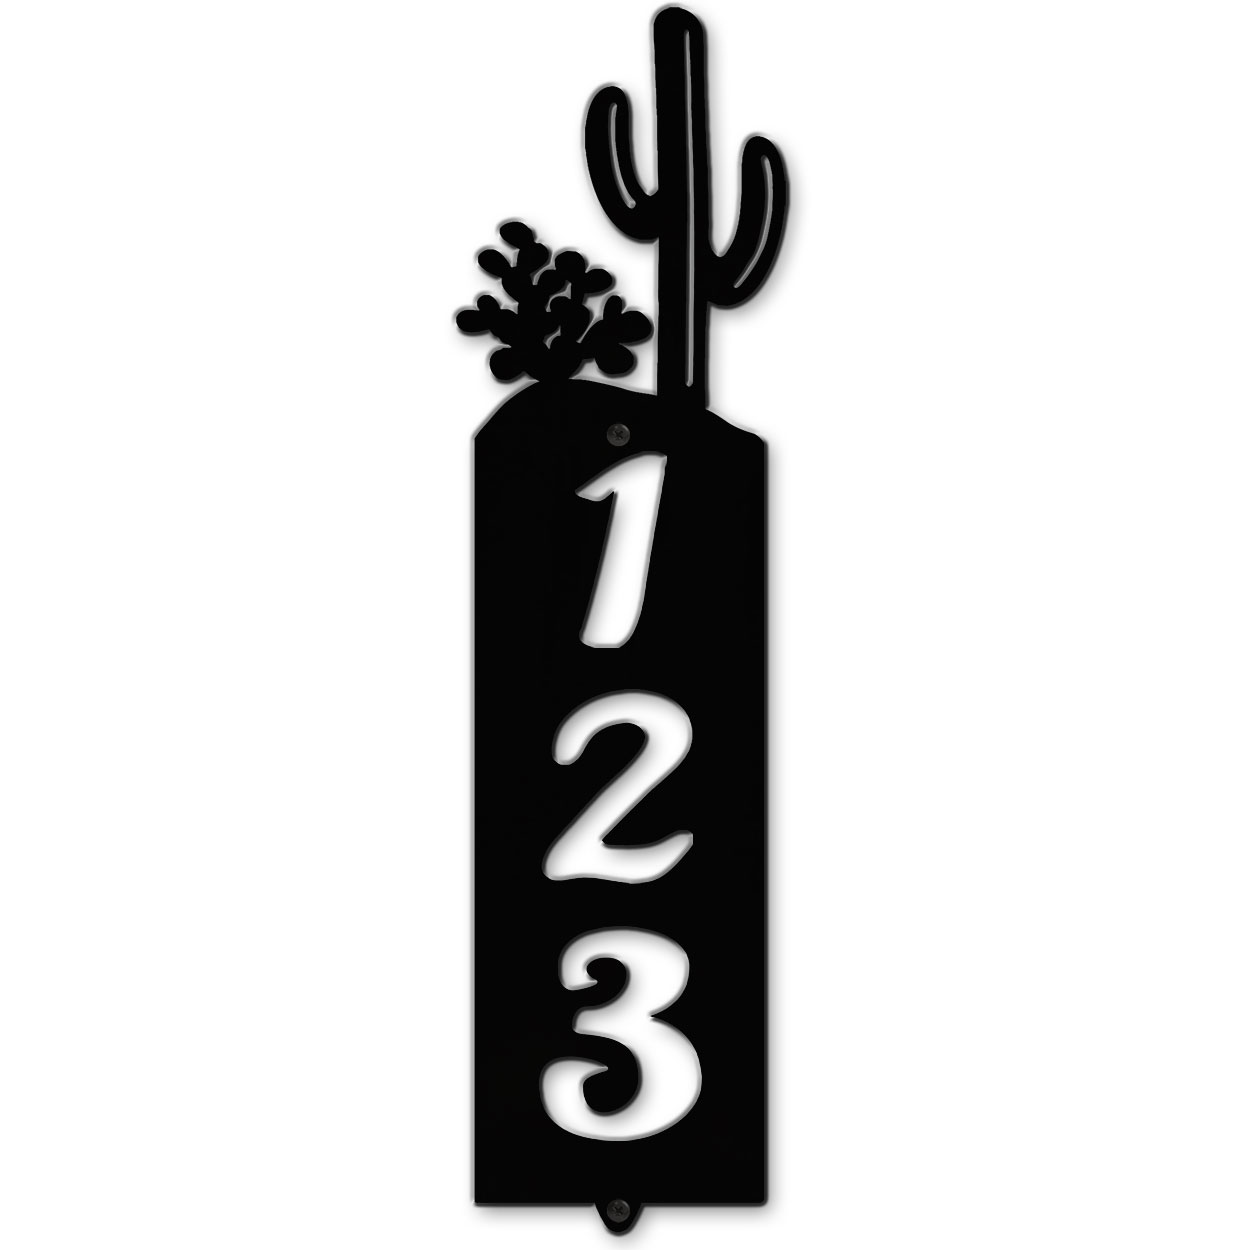 635043 - Cactus Cut Outs Three Digit Address Number Plaque